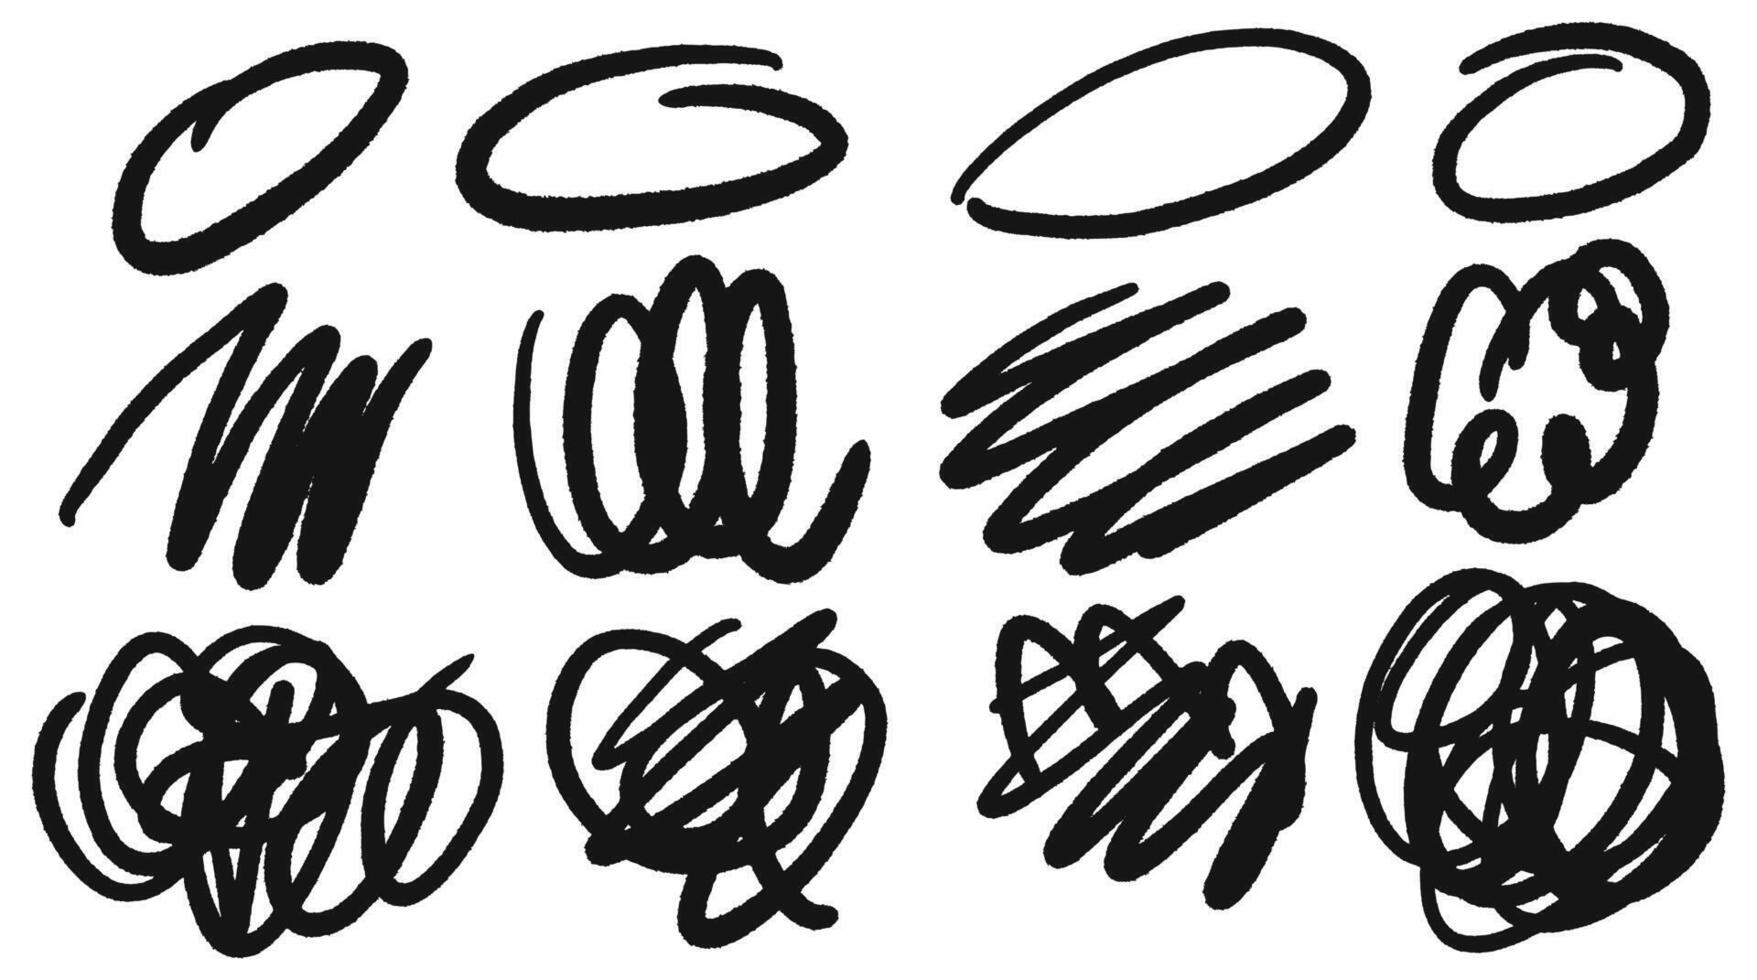 Chaotic doodles with a marker vector